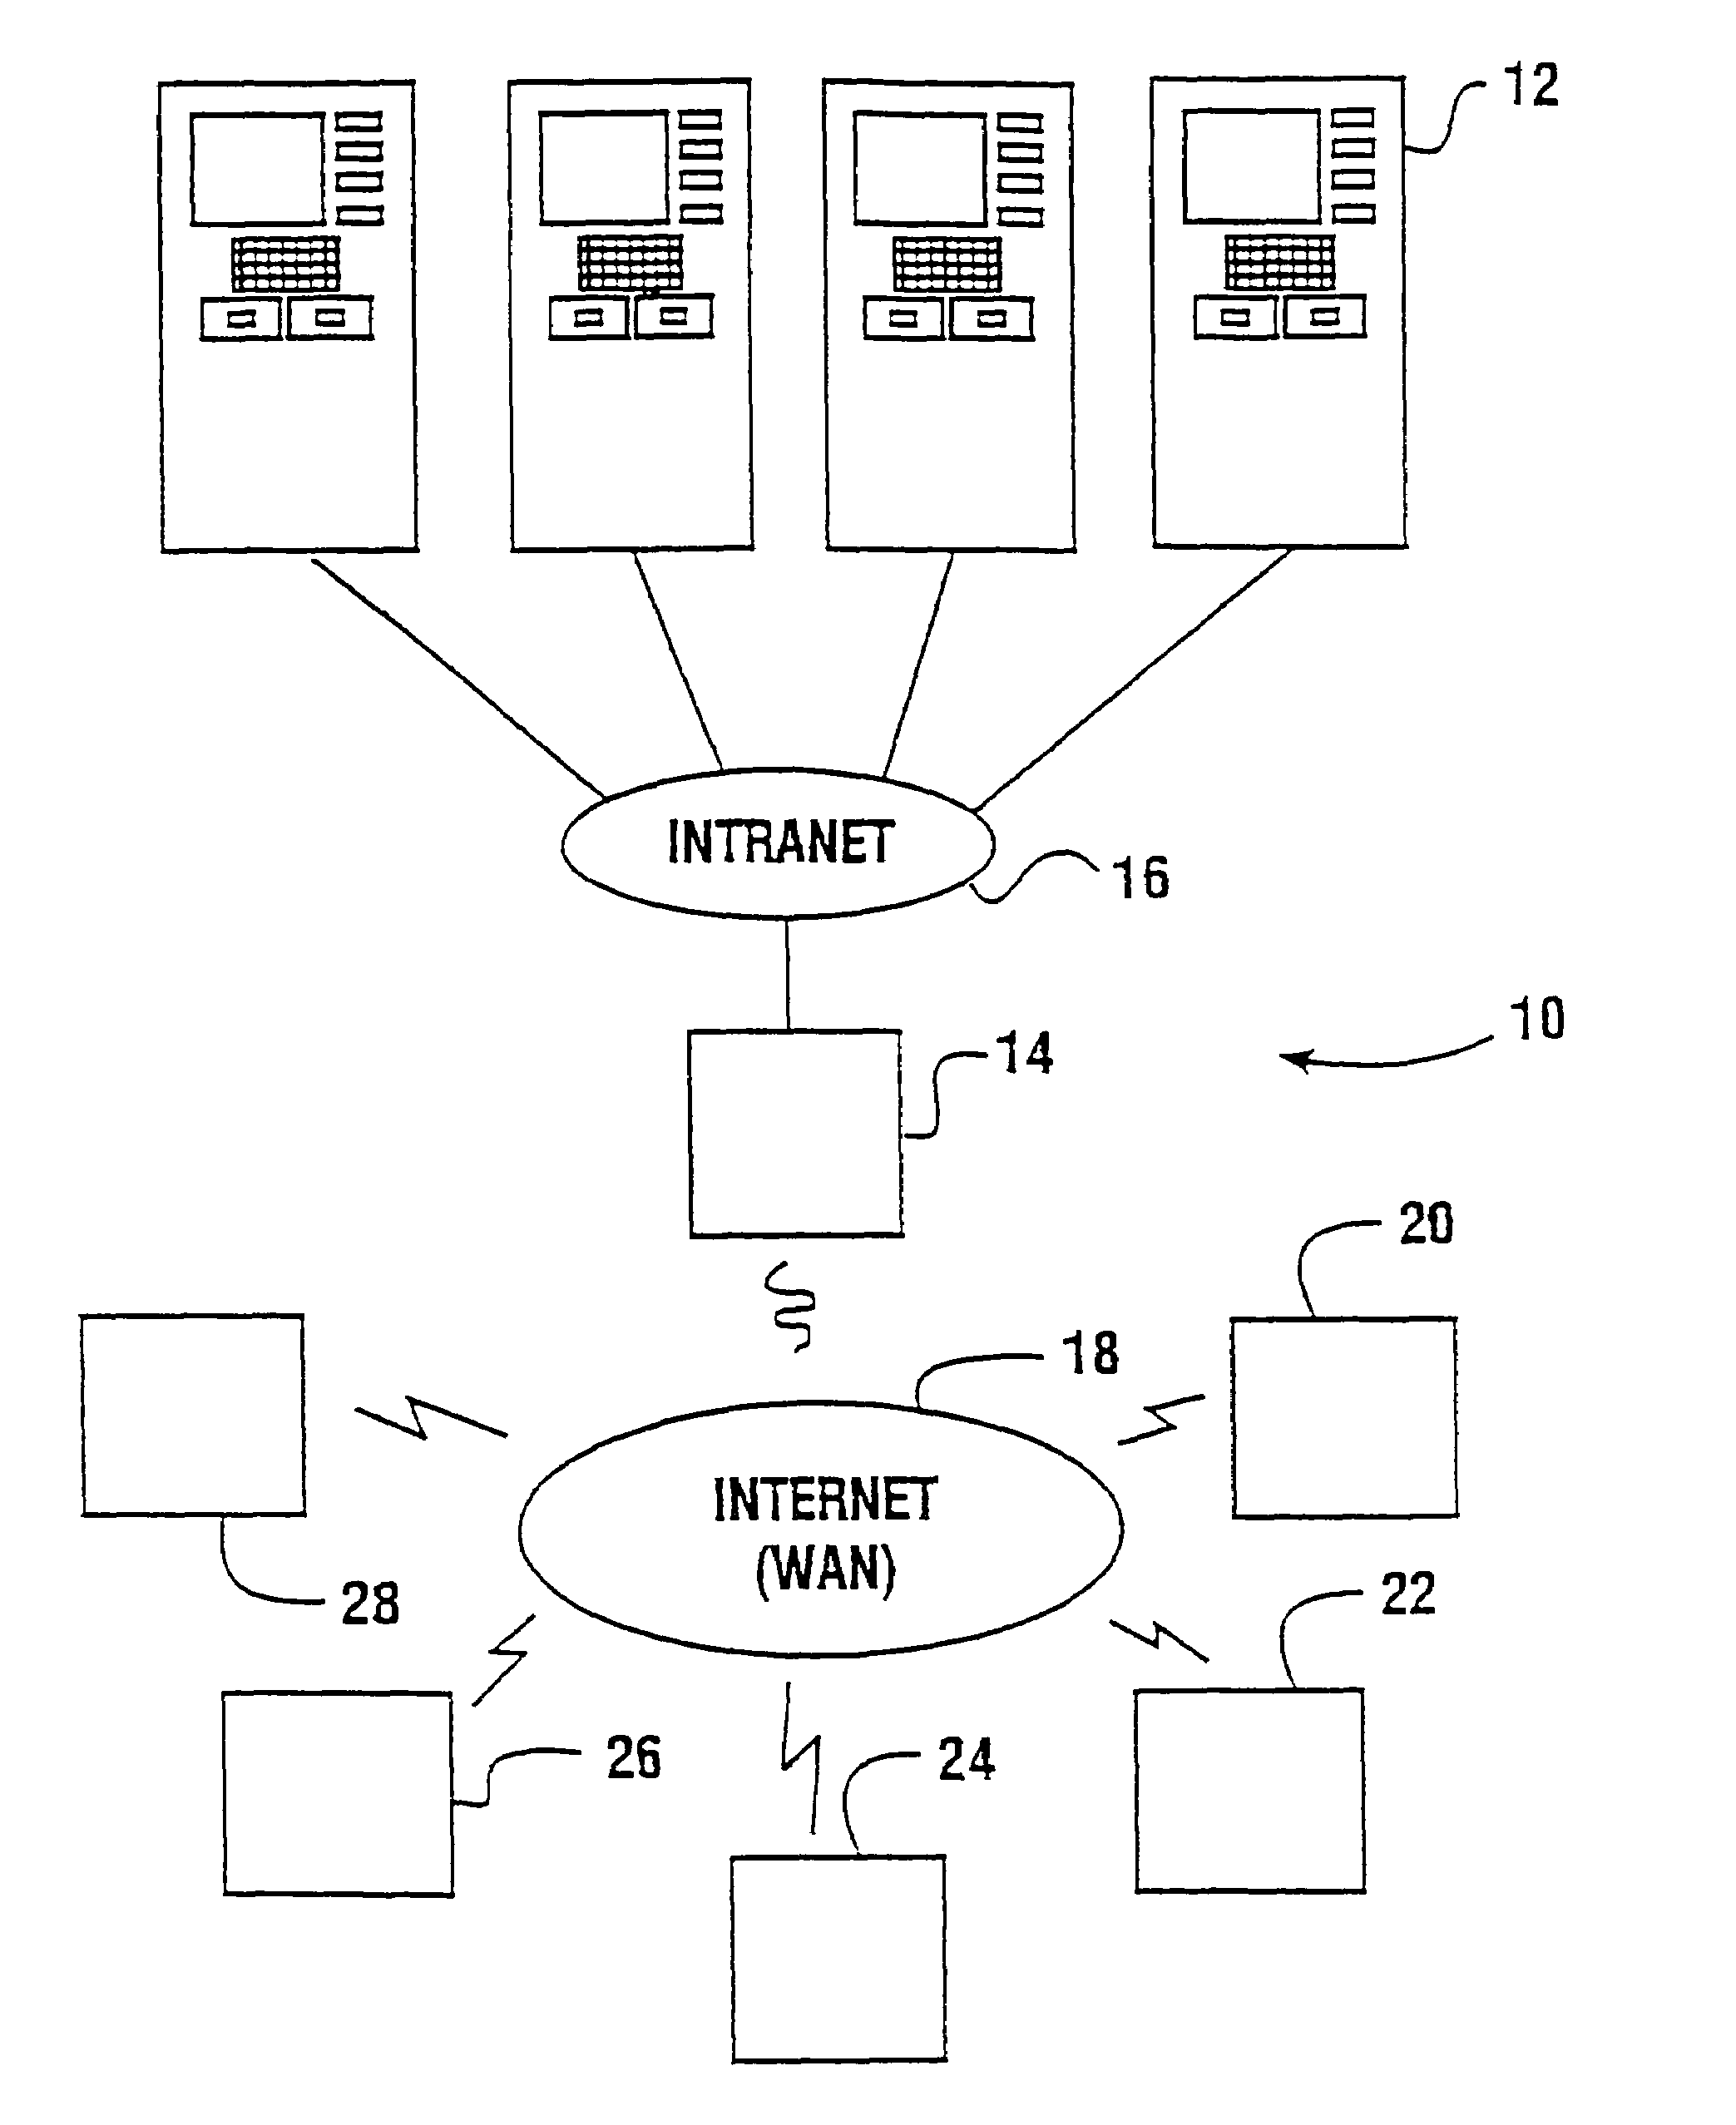 Automated banking machine system with multiple browsers